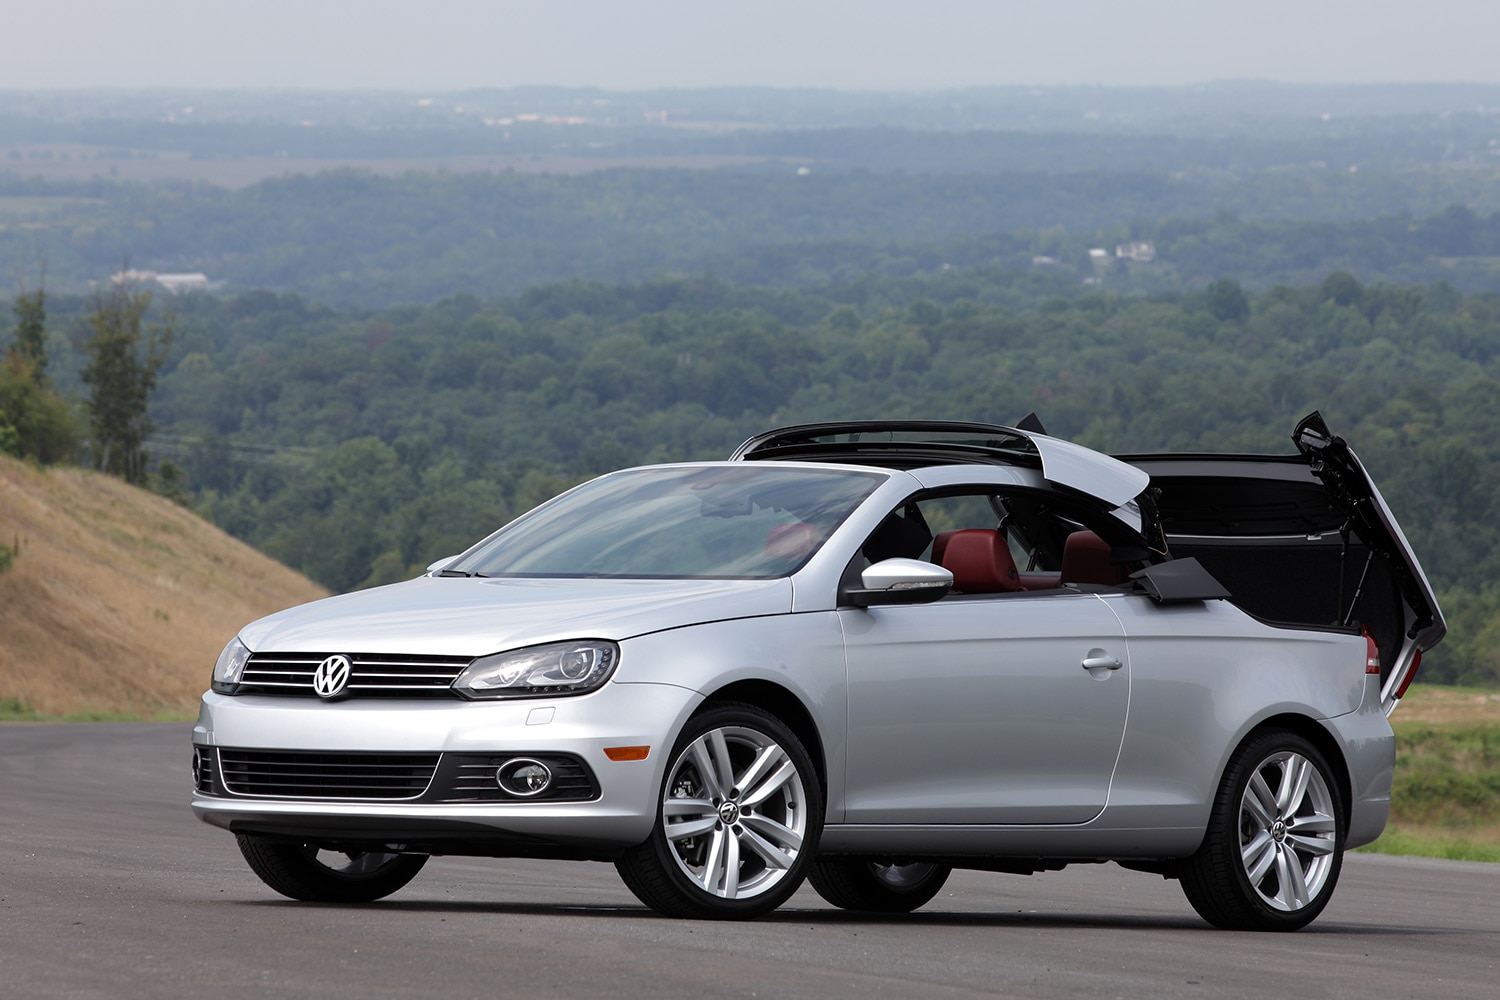 2013 Volkswagen Eos in silver photographed as its convertible hardtop is midway through its opening/closing states.